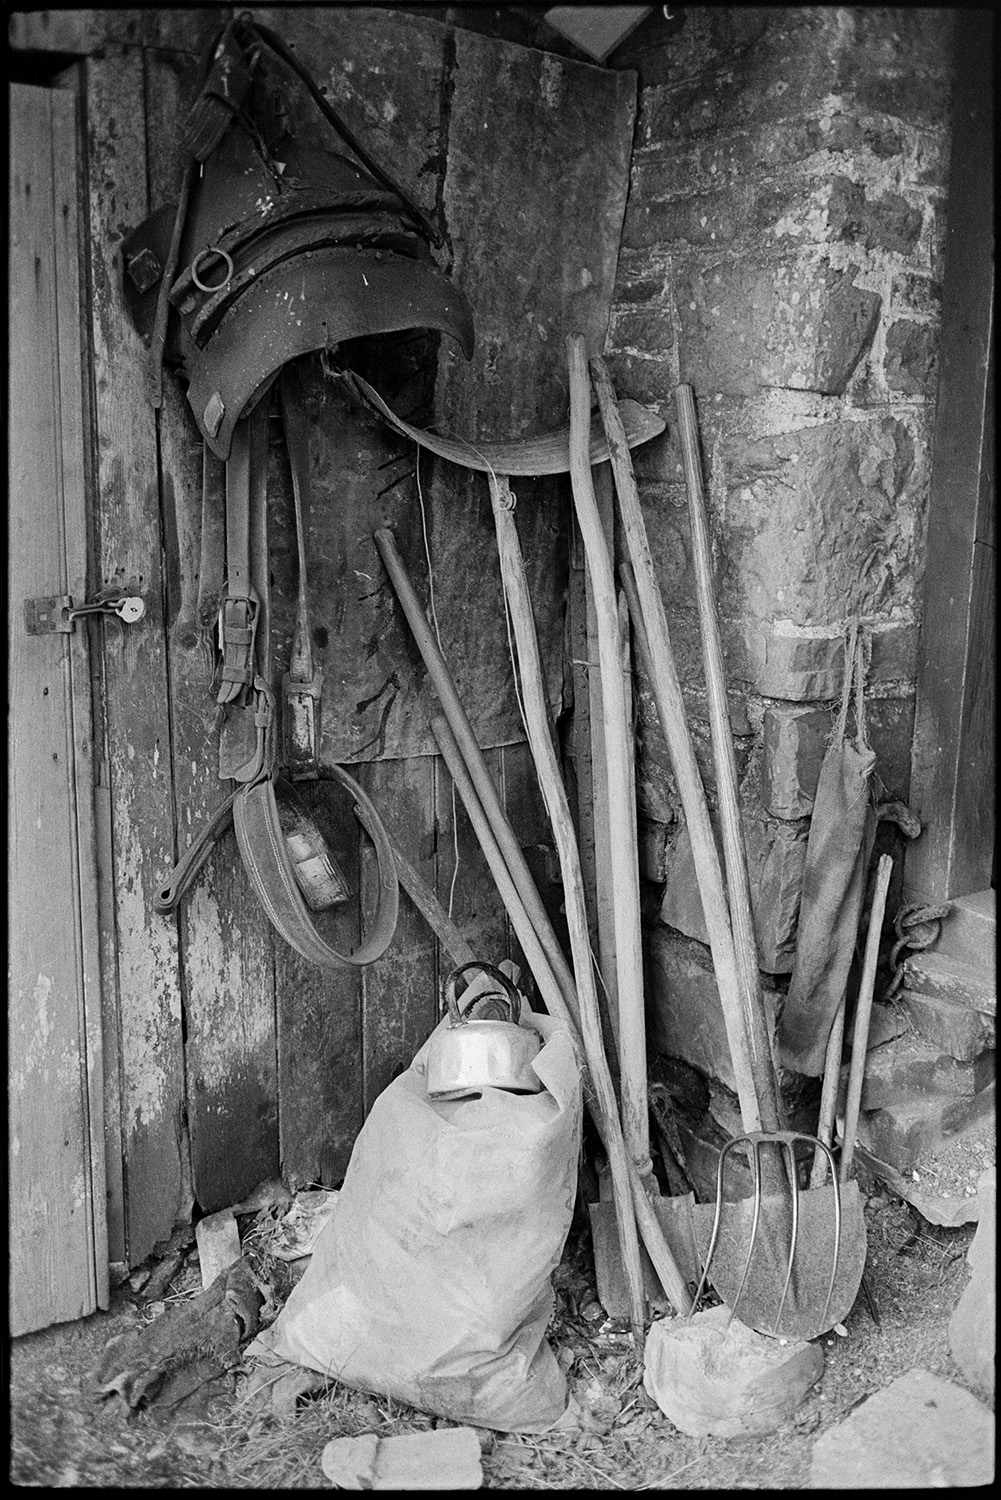 Implements in corner of farm shed, three pronged fork. 
[Spades, a fork, a sack, leather straps and possibly a saddle stacked in the corner of a farm shed by a wooden door, at Colehouse, Riddlecombe.]